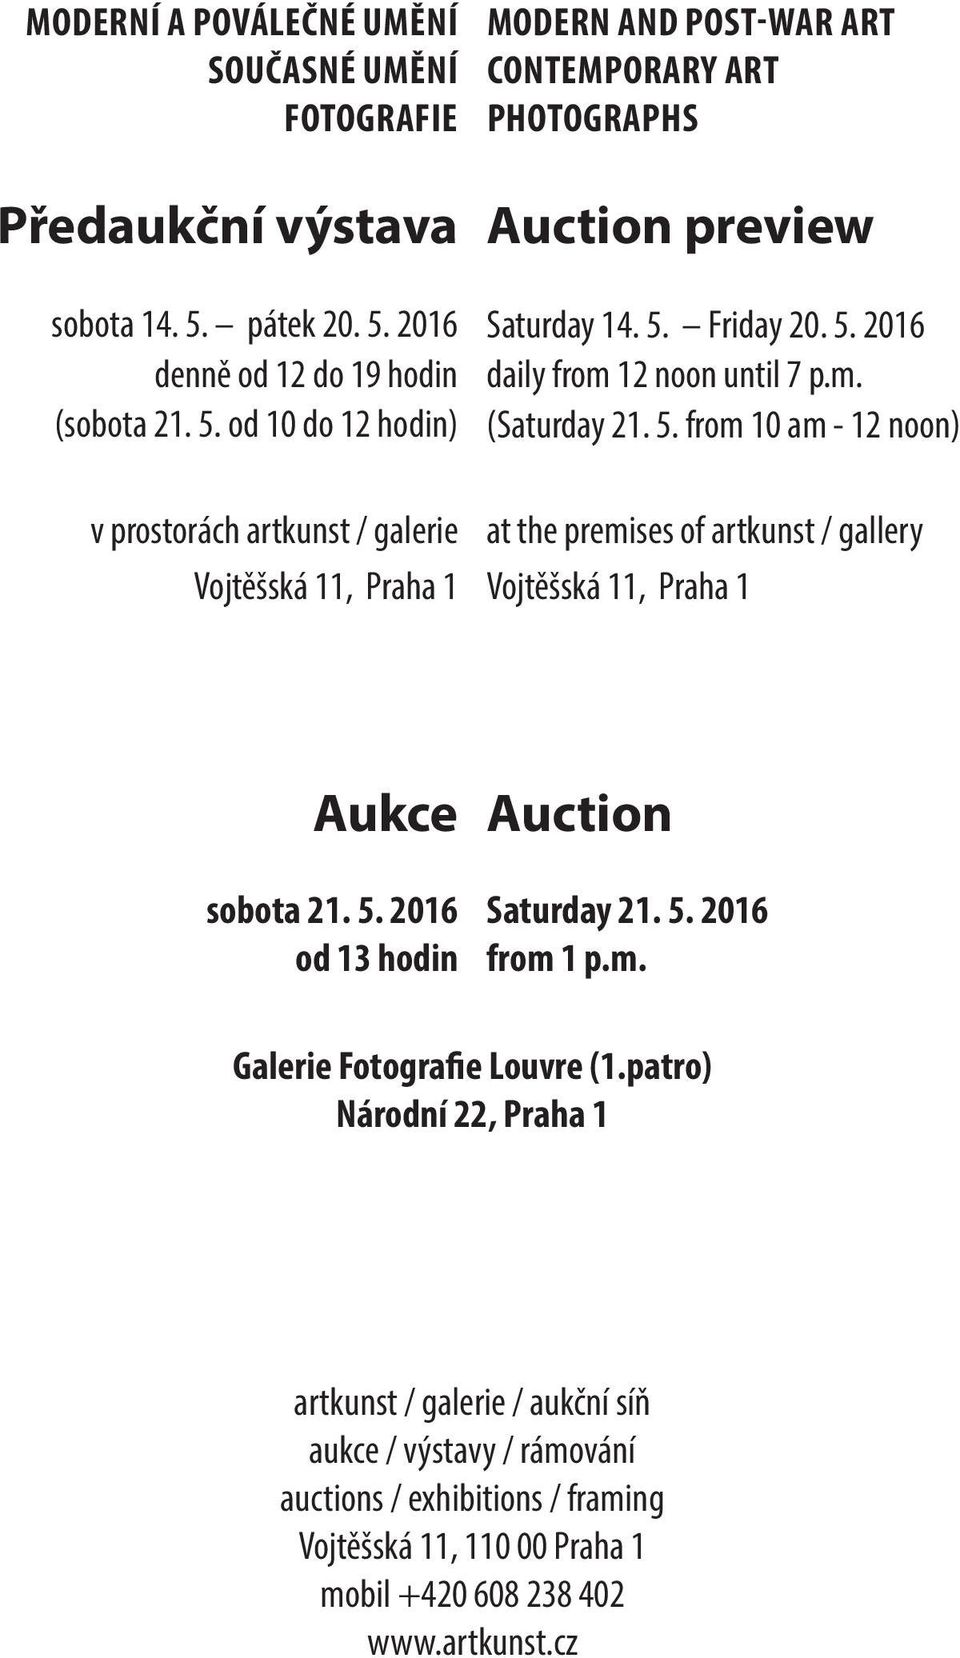 5. Friday 20. 5. 2016 daily from 12 noon until 7 p.m. (Saturday 21. 5. from 10 am - 12 noon) at the premises of artkunst / gallery Vojtěšská 11, Praha 1 Aukce sobota 21. 5. 2016 od 13 hodin Auction Saturday 21.